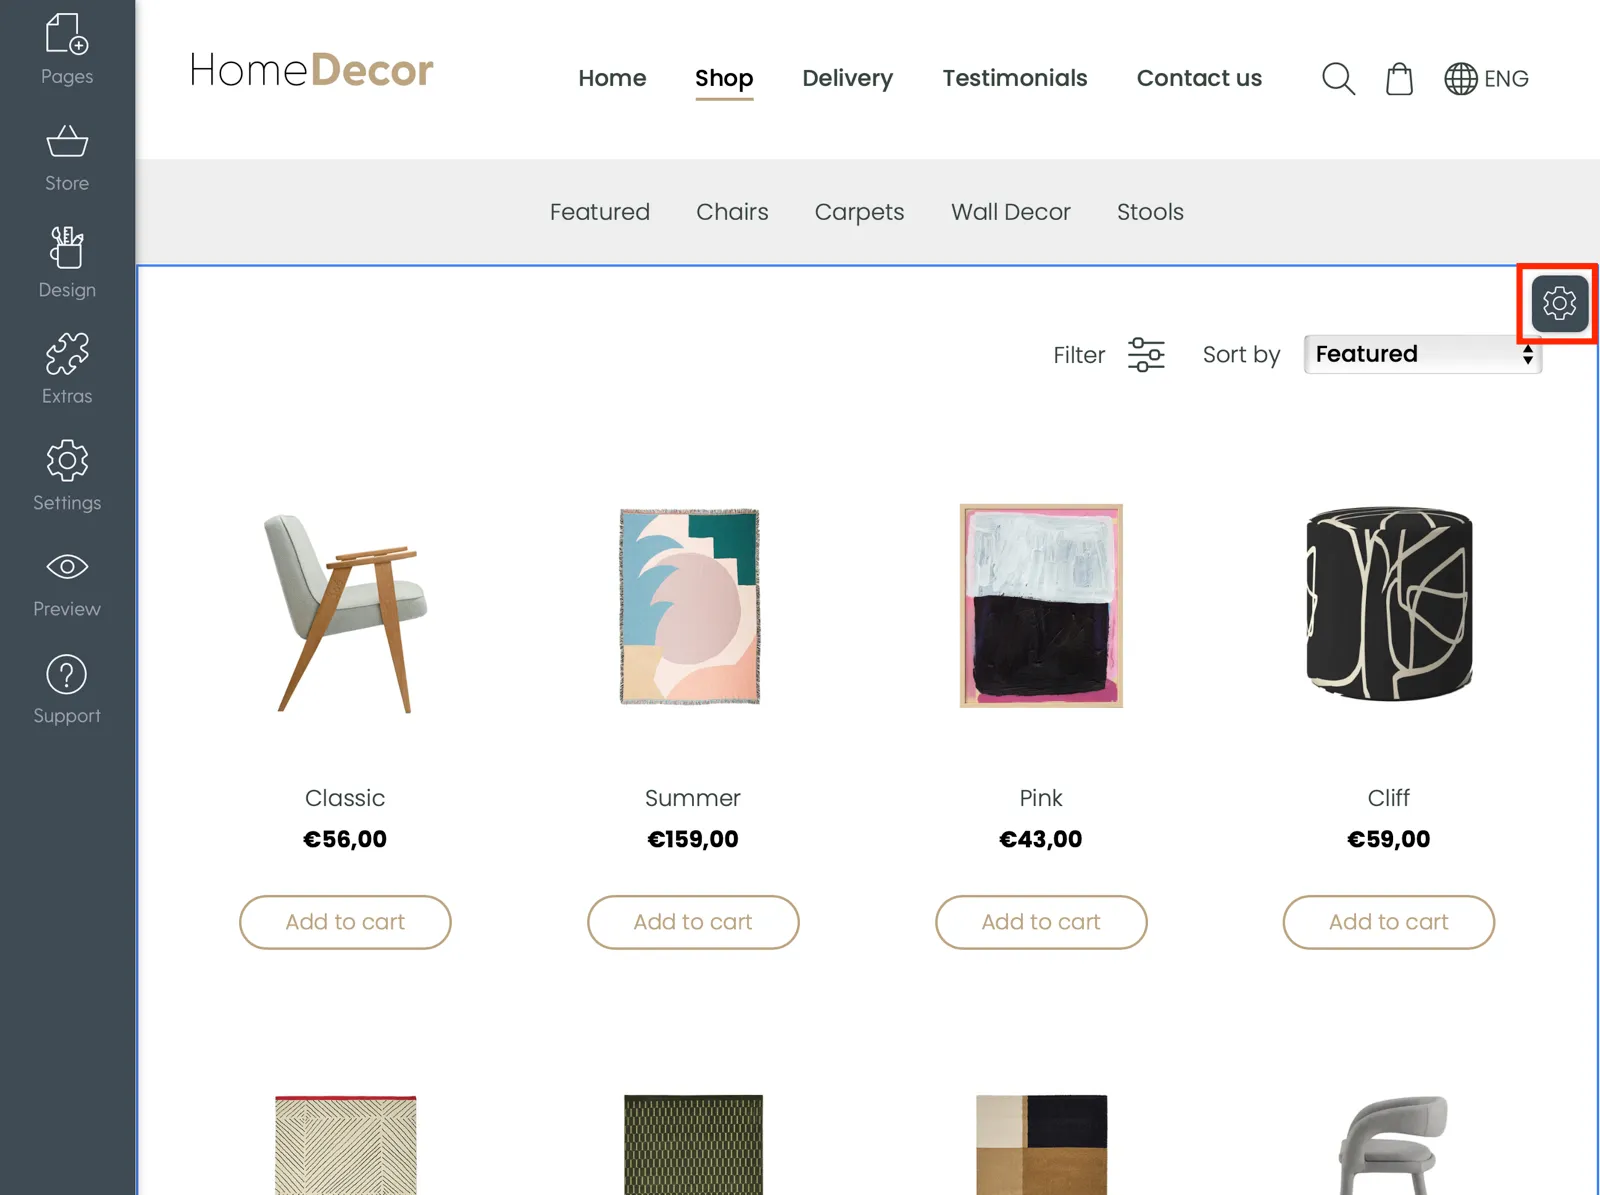 Editing the layout of your online store